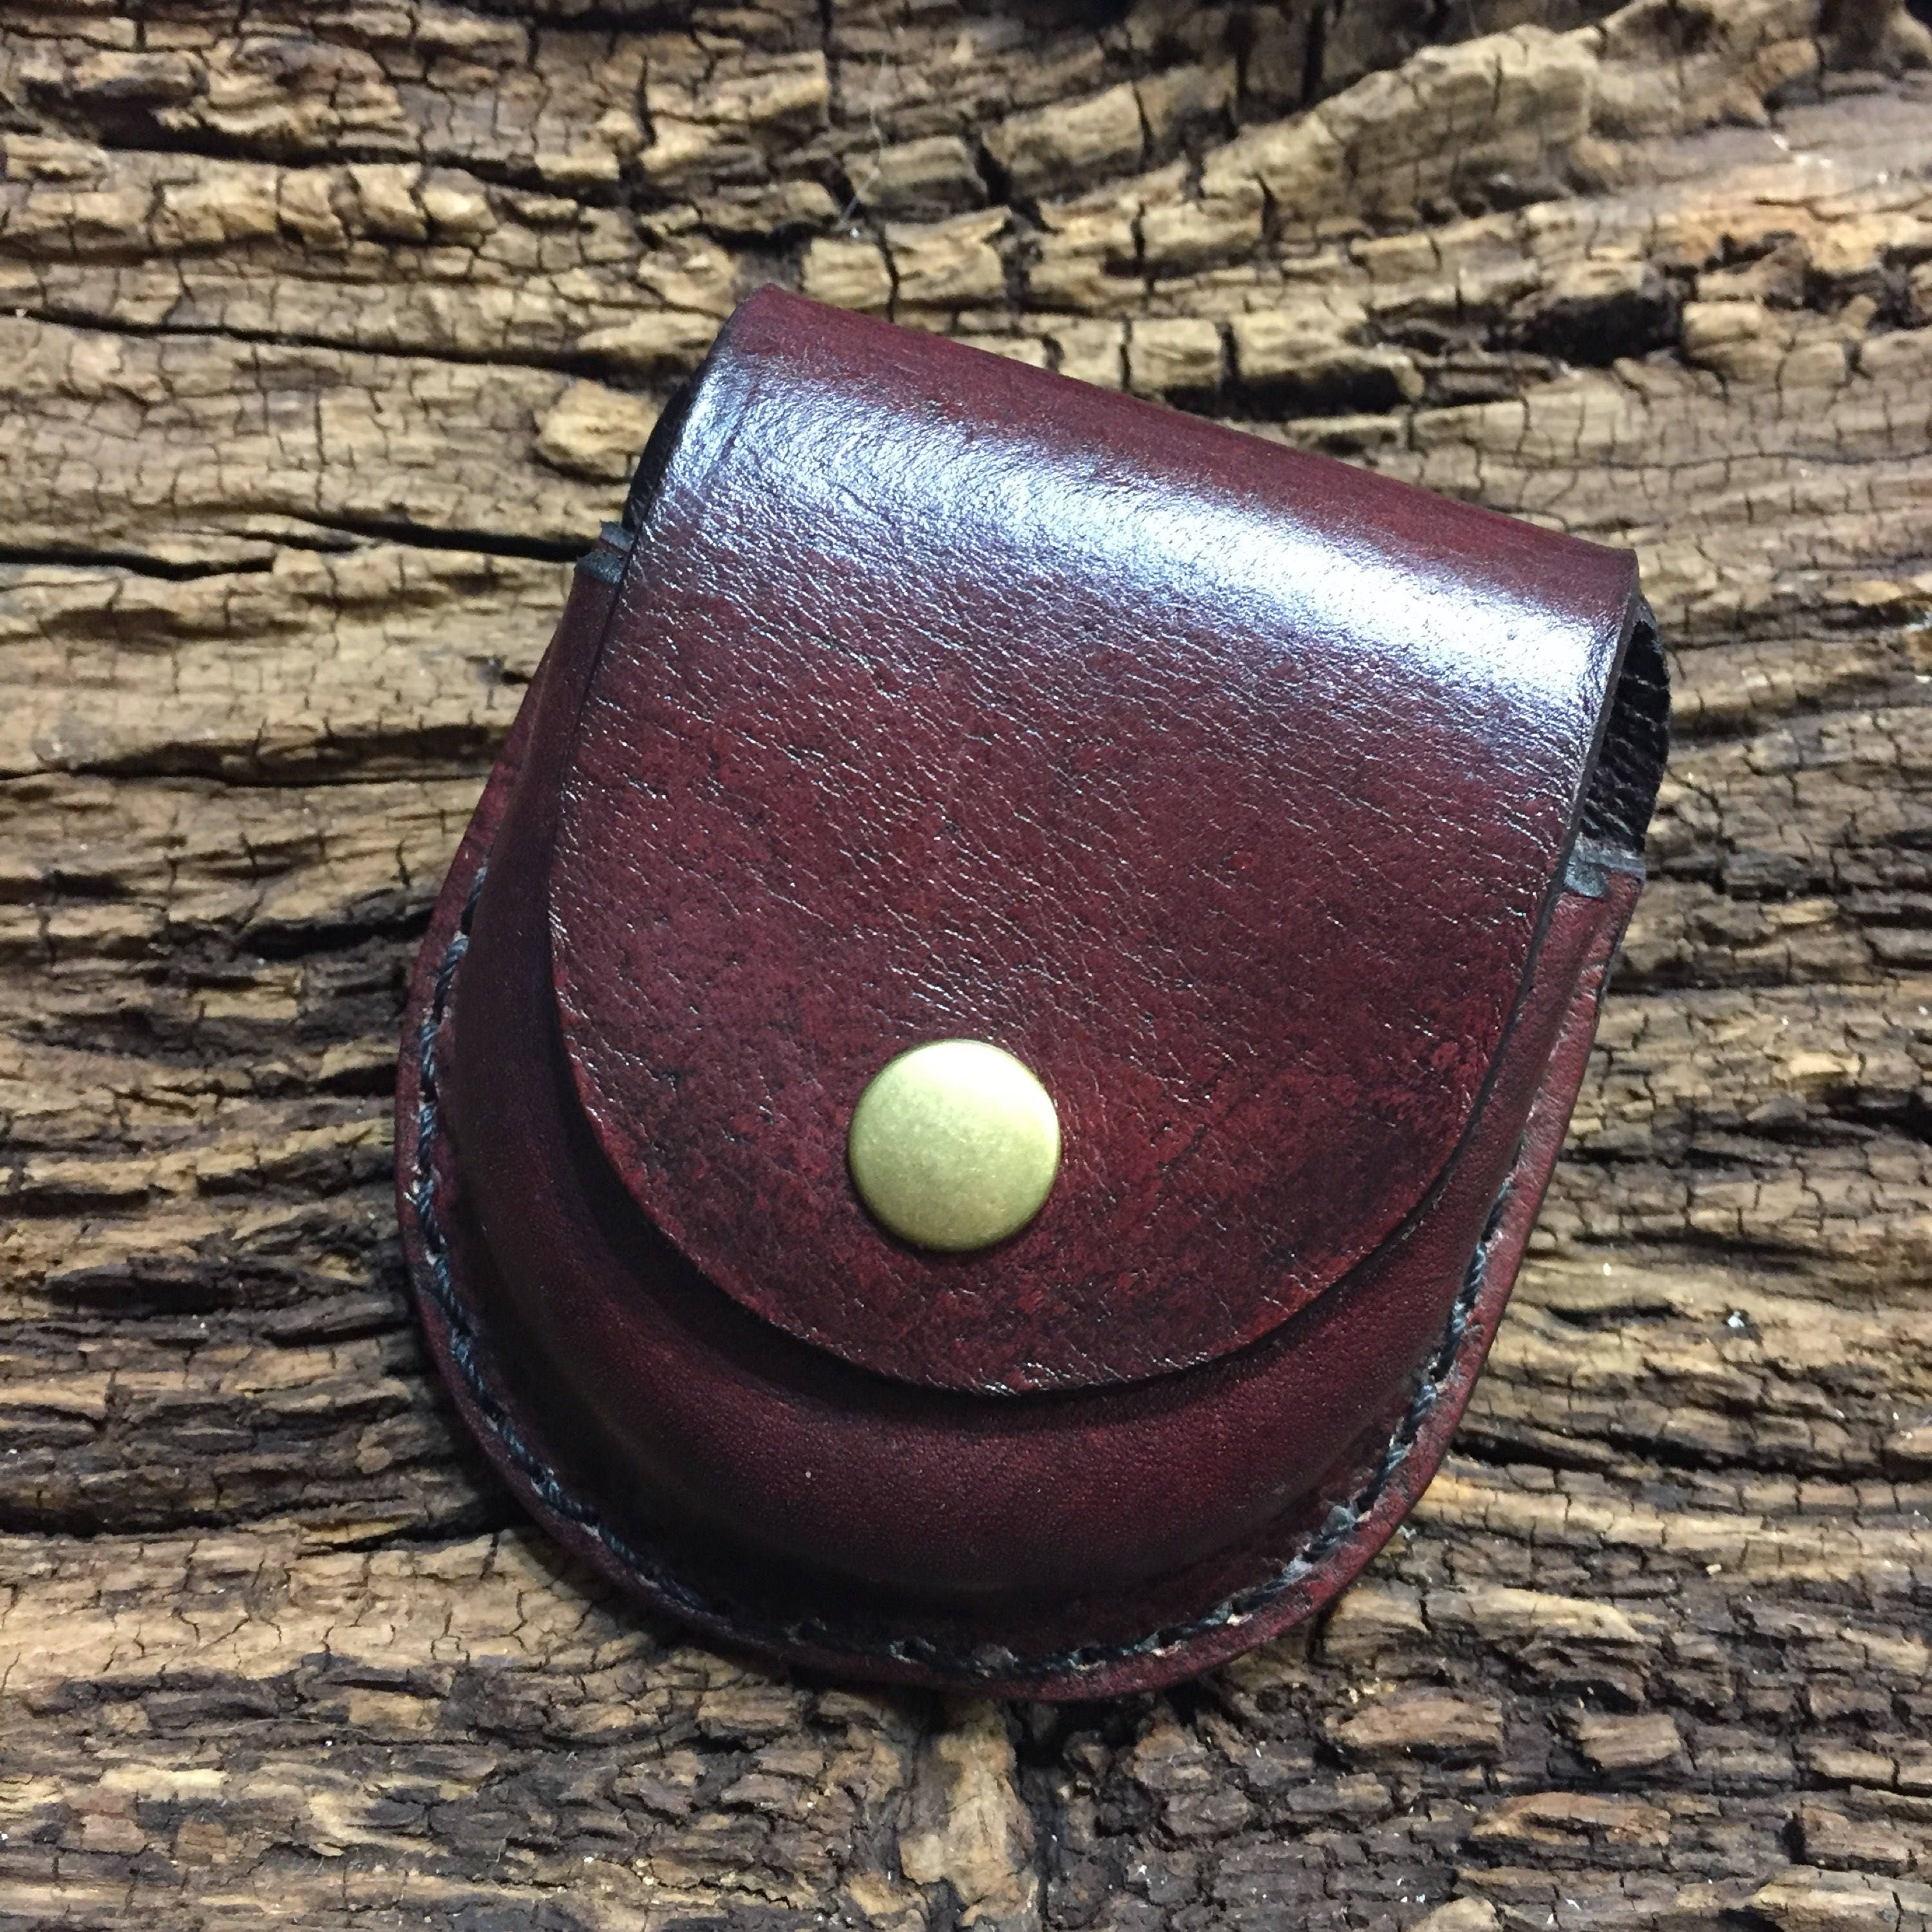 leather watch case